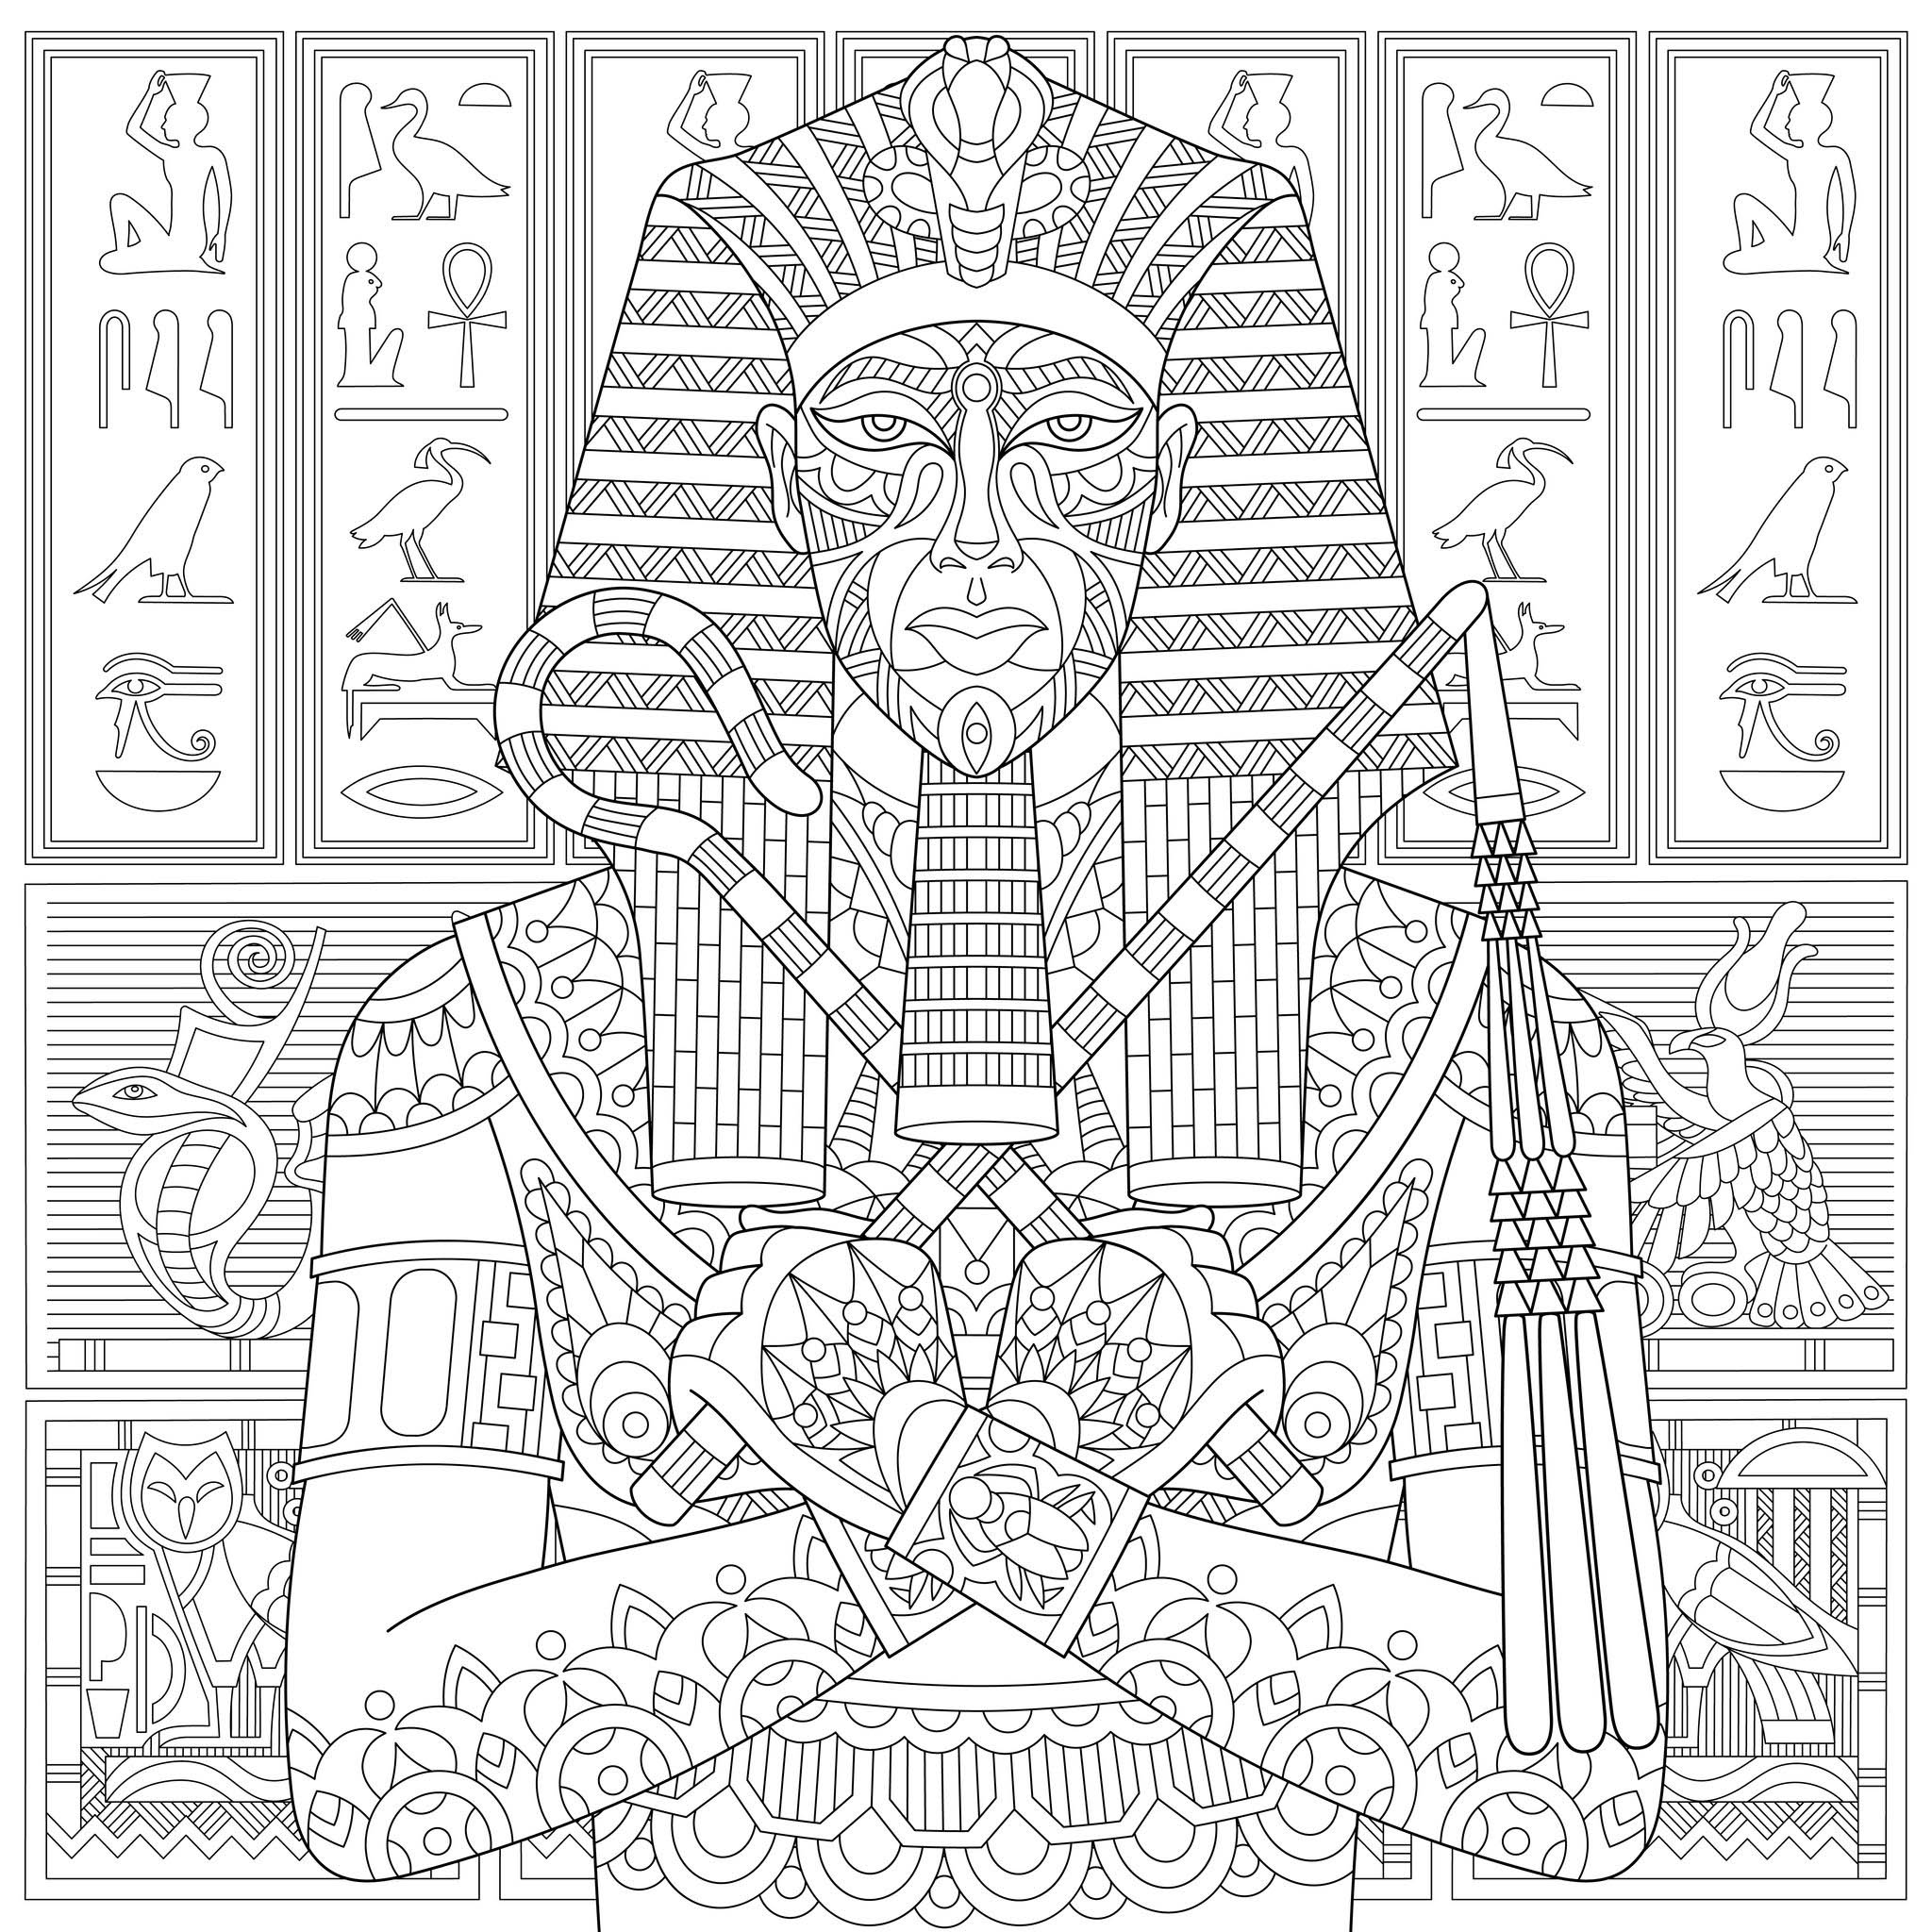 Egypt to download - Egypt Kids Coloring Pages